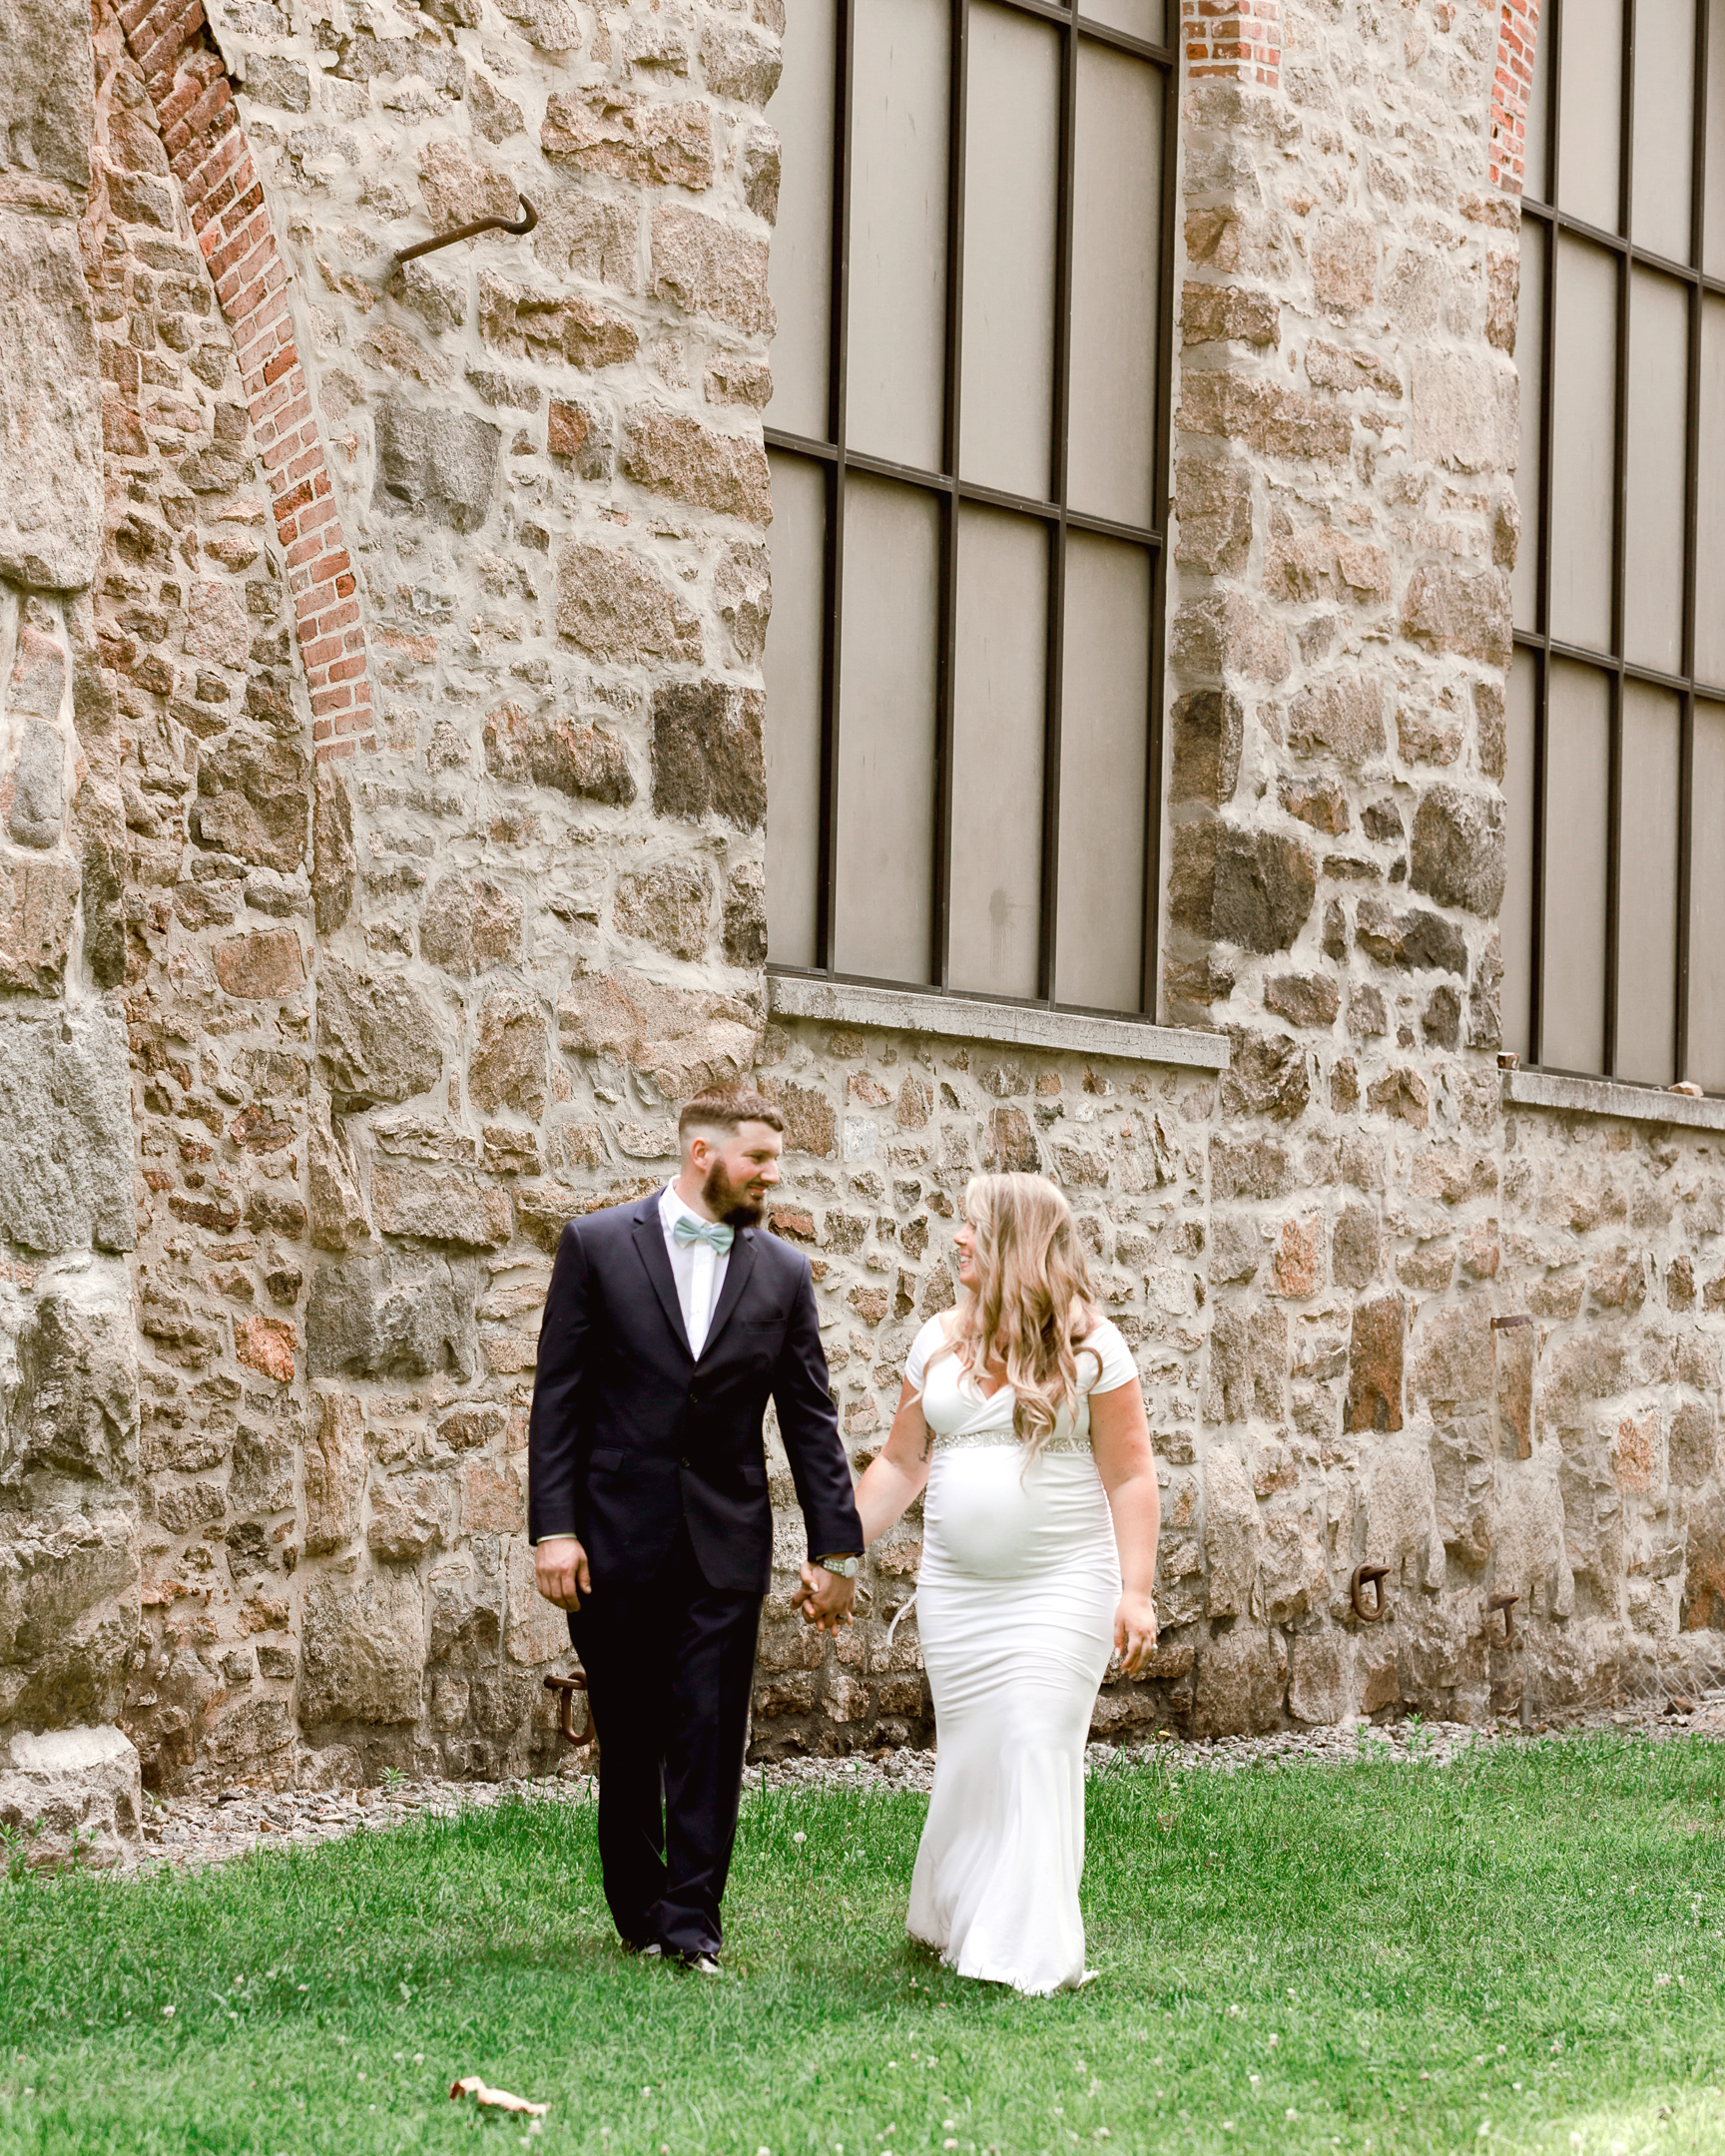 Bride and groom walking in front of a large stone building